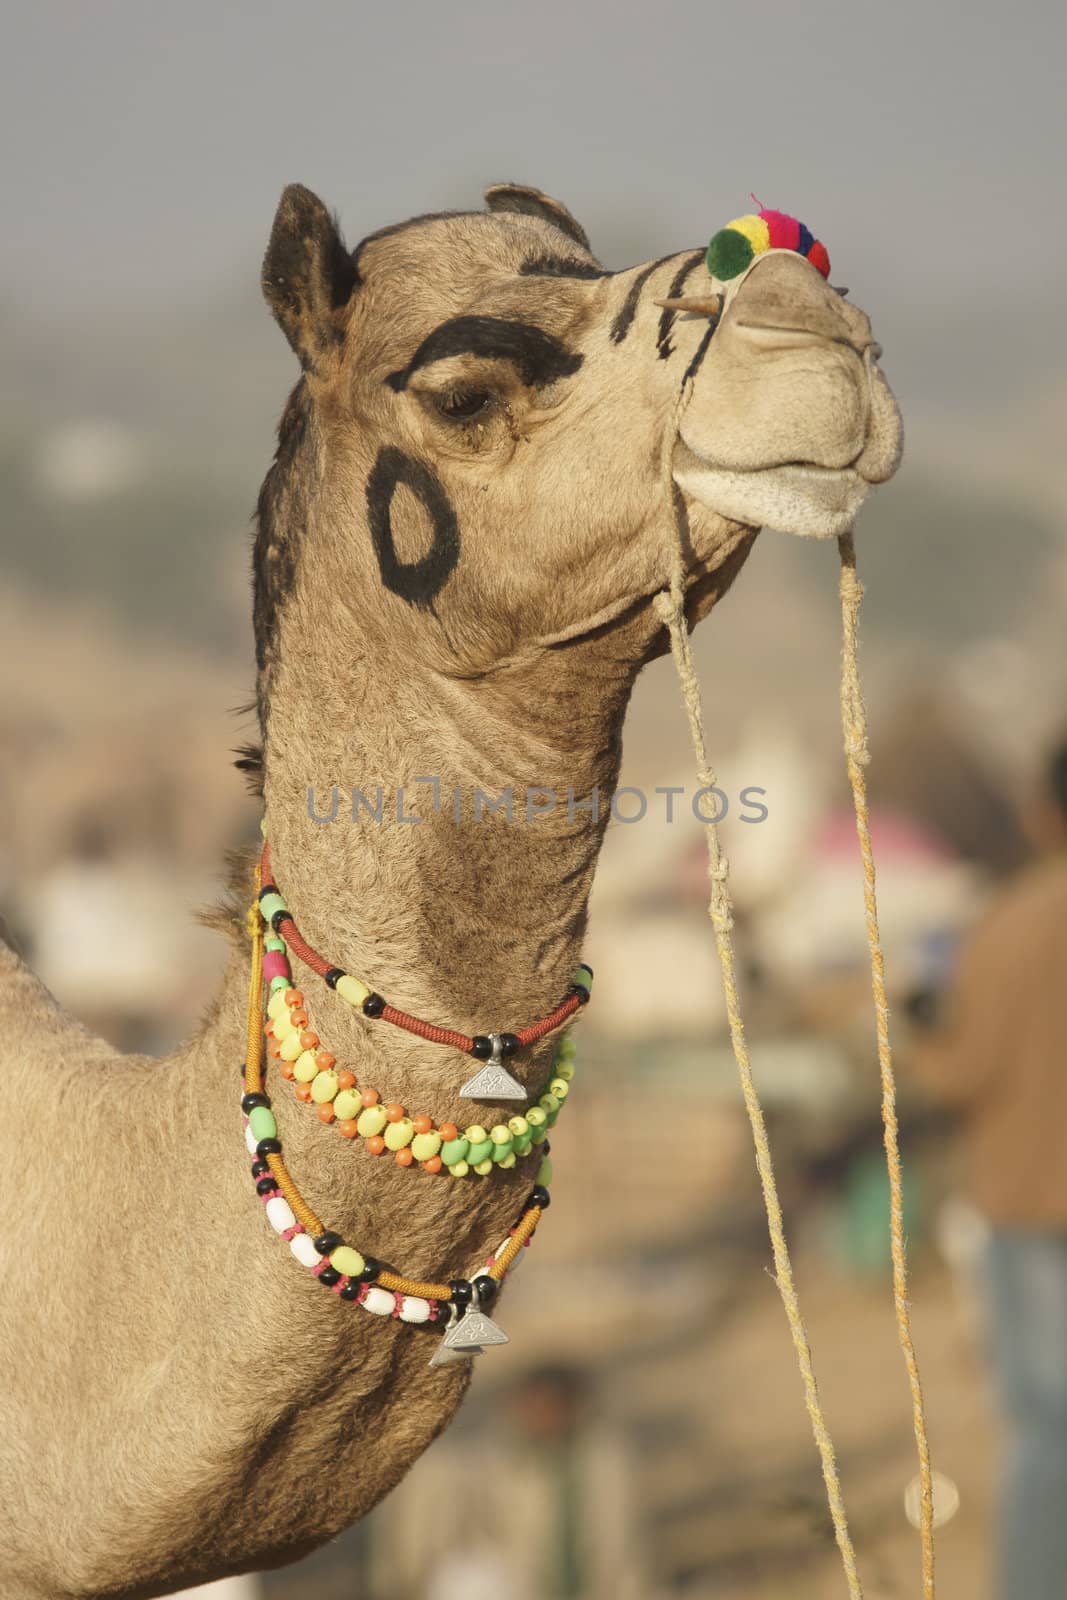 Head and neck of a well groomed camel at the annual Pushkar Fair in Rajasthan, India